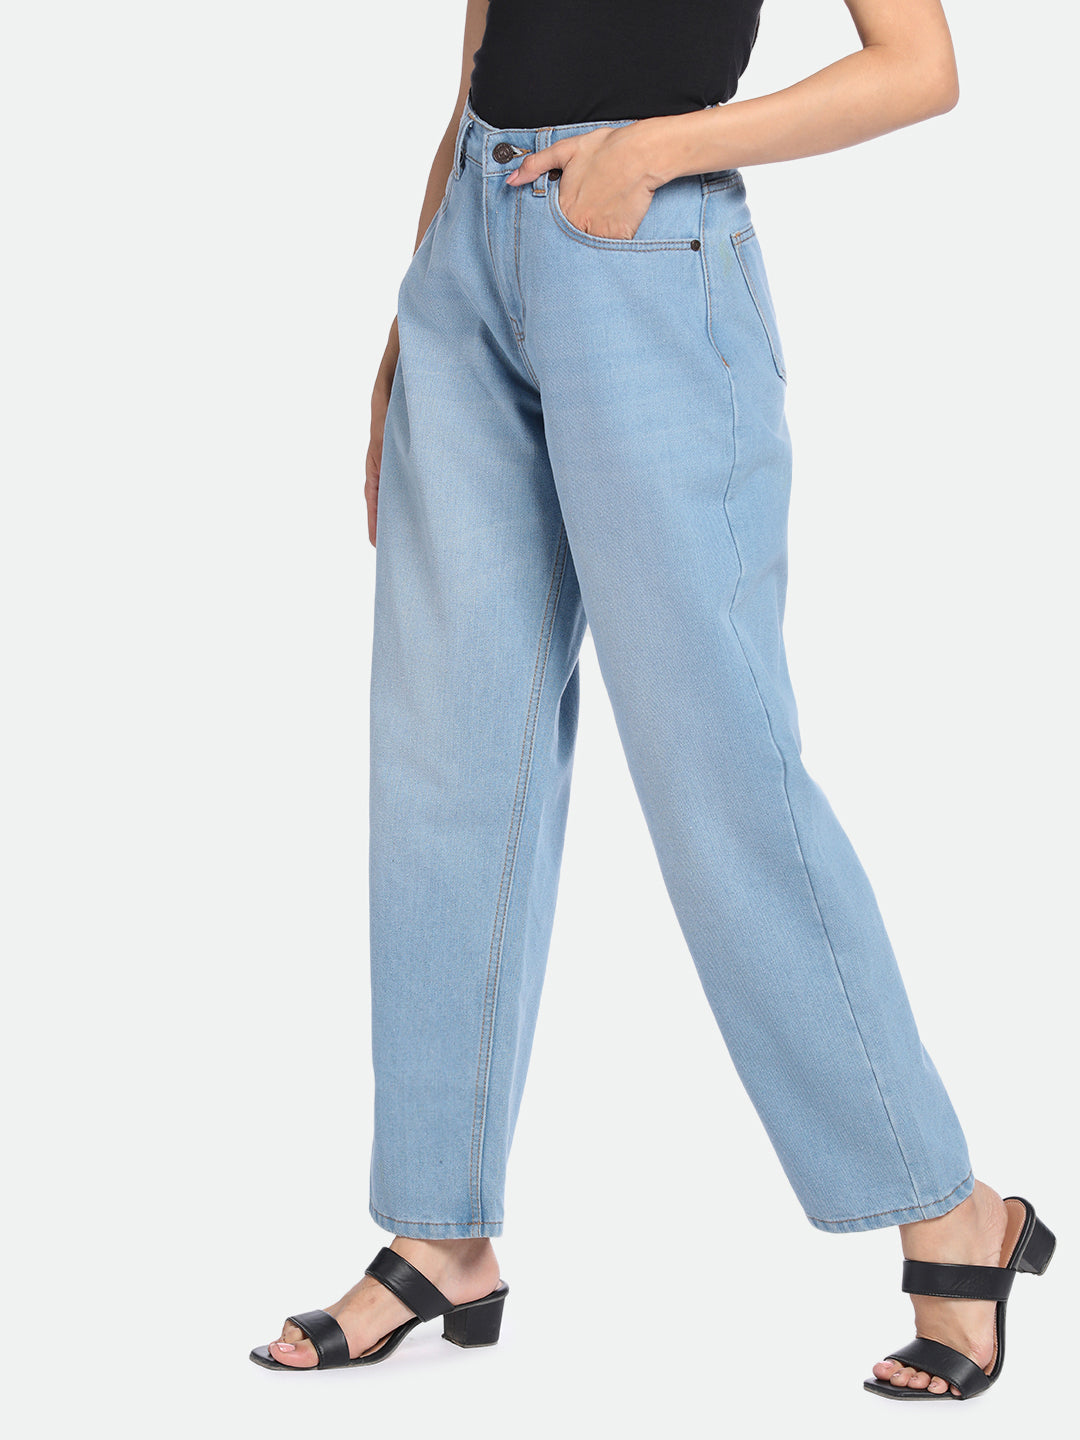 DL Woman Indigo Relaxed Fit Jeans